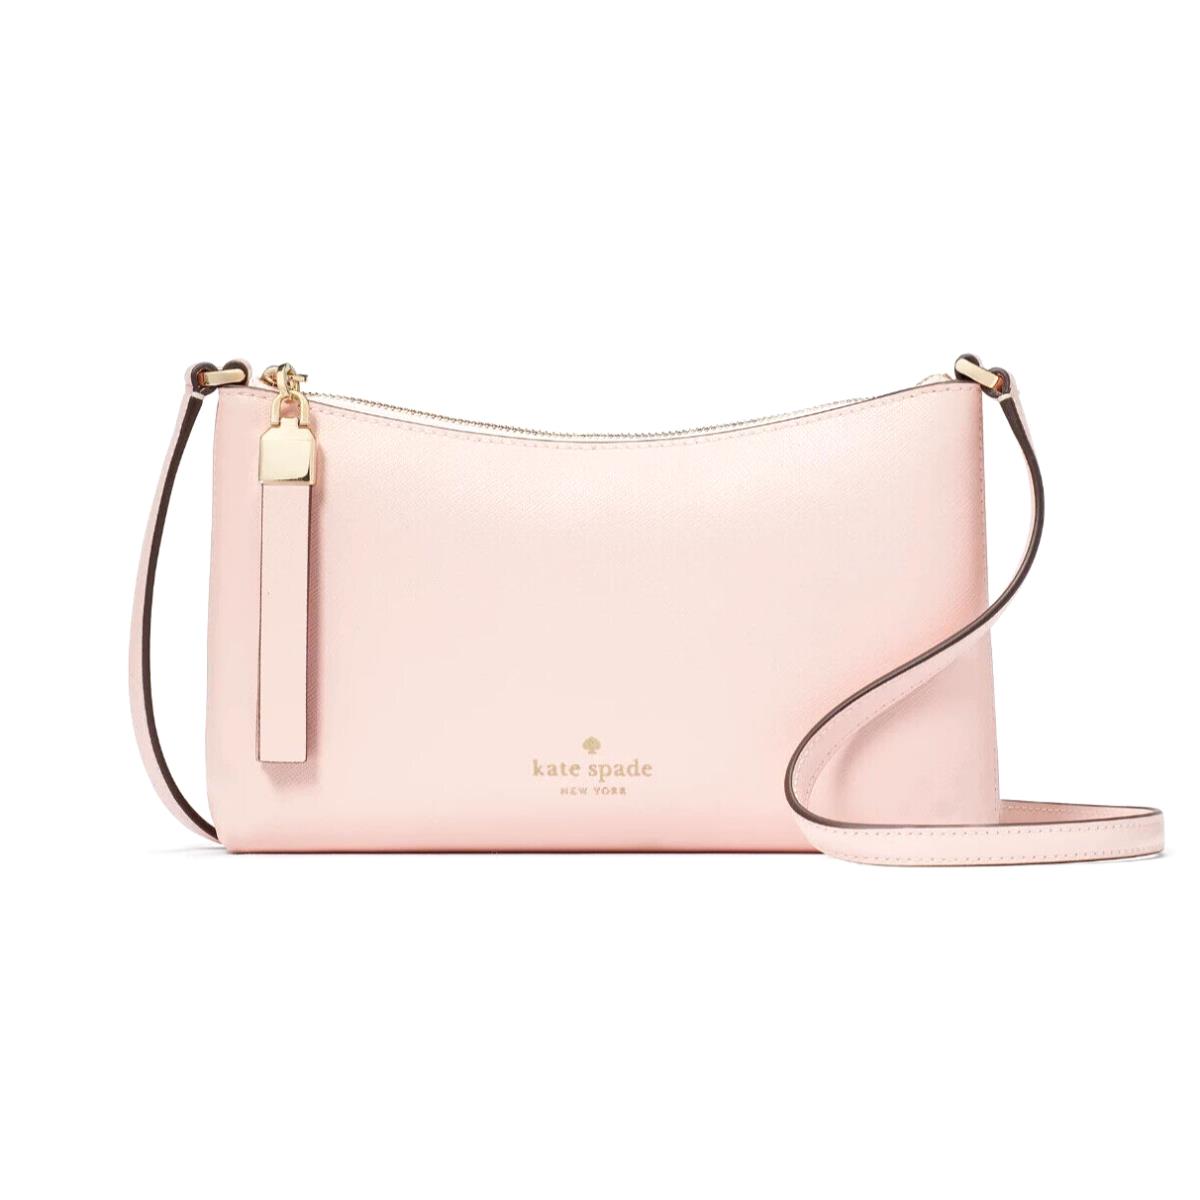 New Kate Spade Sadie Crossbody Saffiano Leather Chalk Pink with Dust Bag